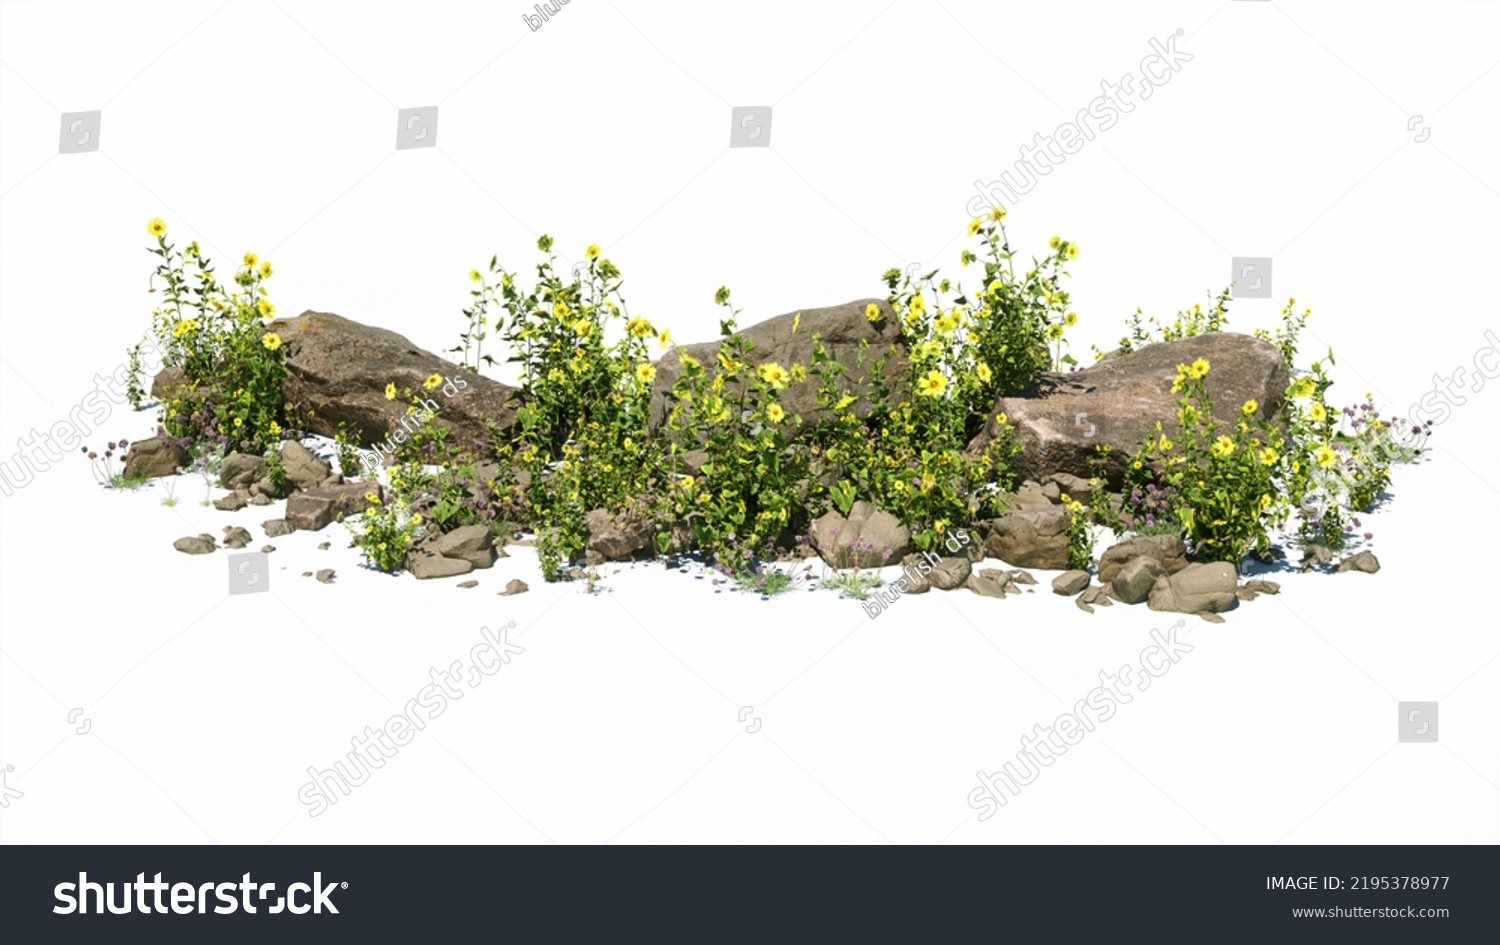 Cutout rock surrounded by yellow flowers. Garden design isolated on white background. Flowering shrub and green plants for landscaping. Decorative shrub and flower bed. #2195378977